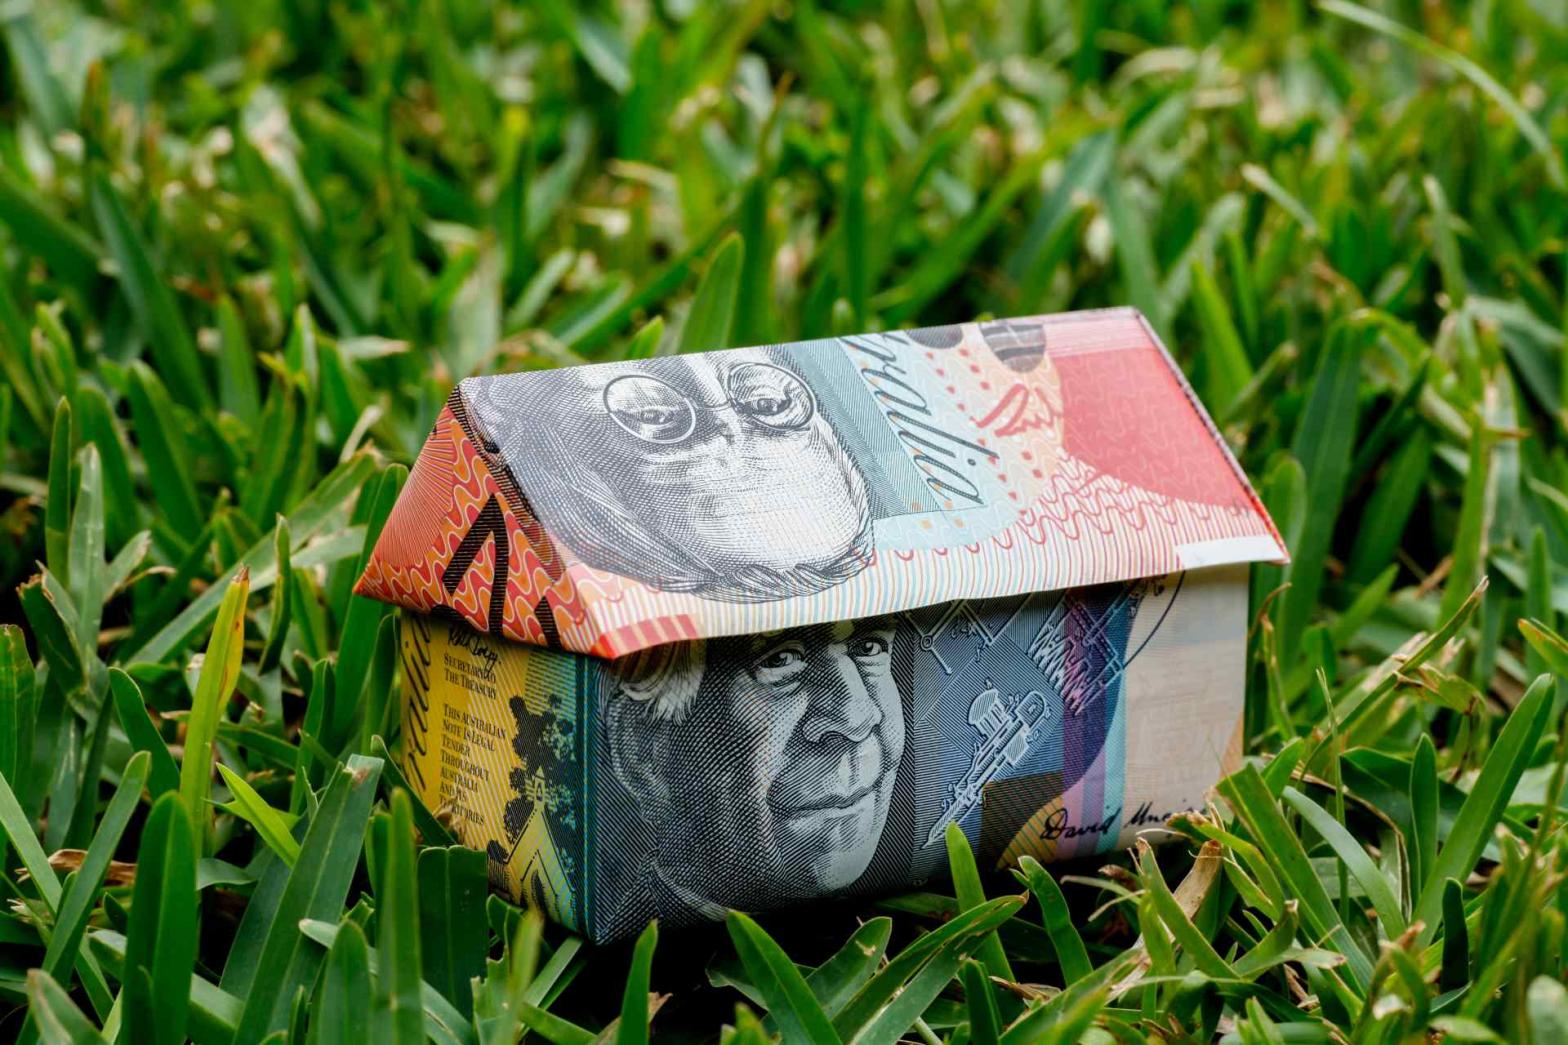 Folded Australian dollar notes make up a tiny house on a green lawn